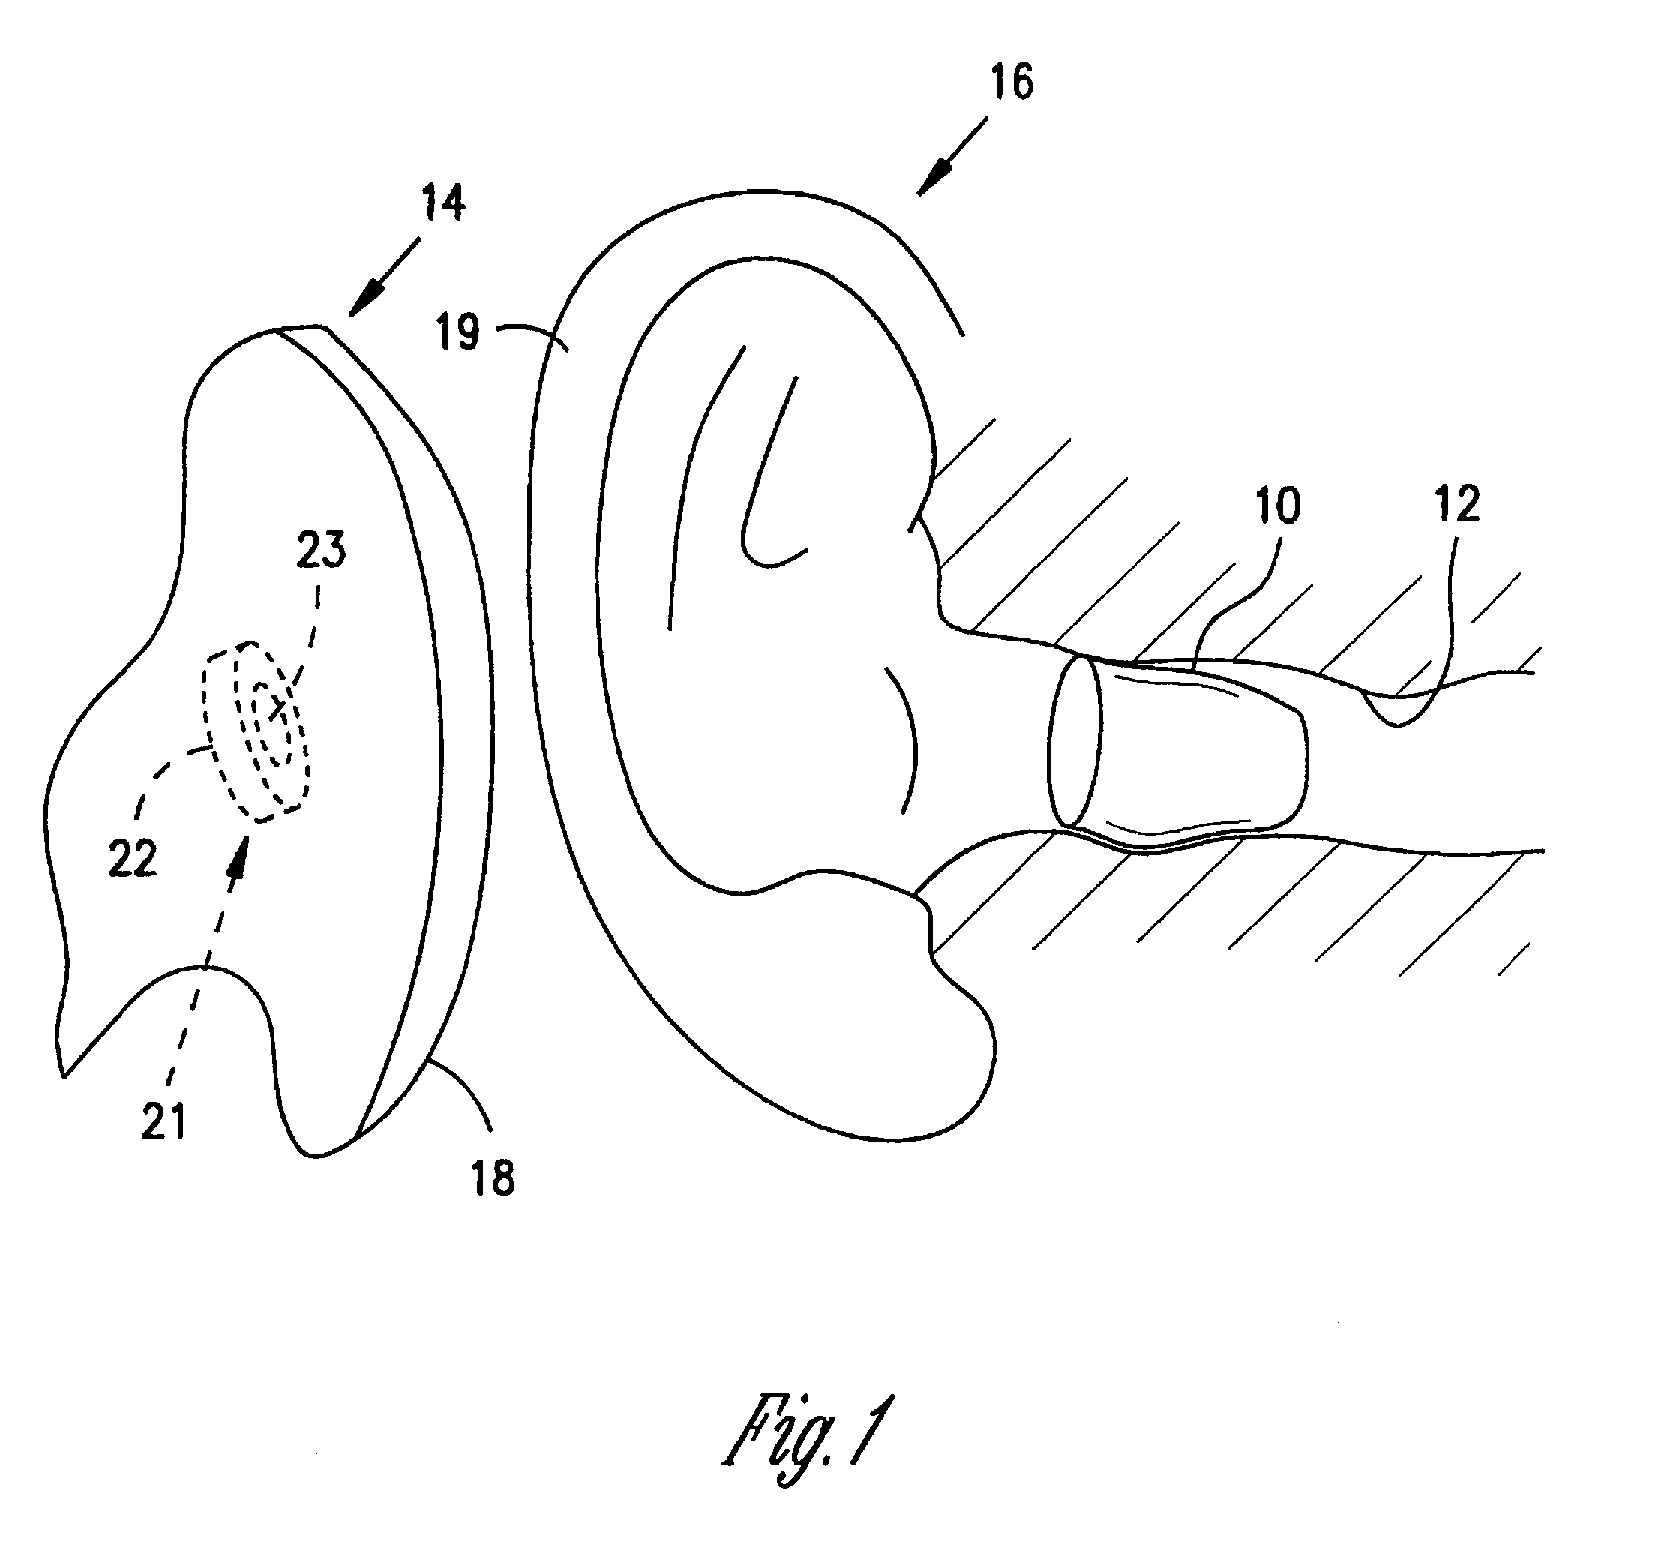 Switching structures for hearing assistance device